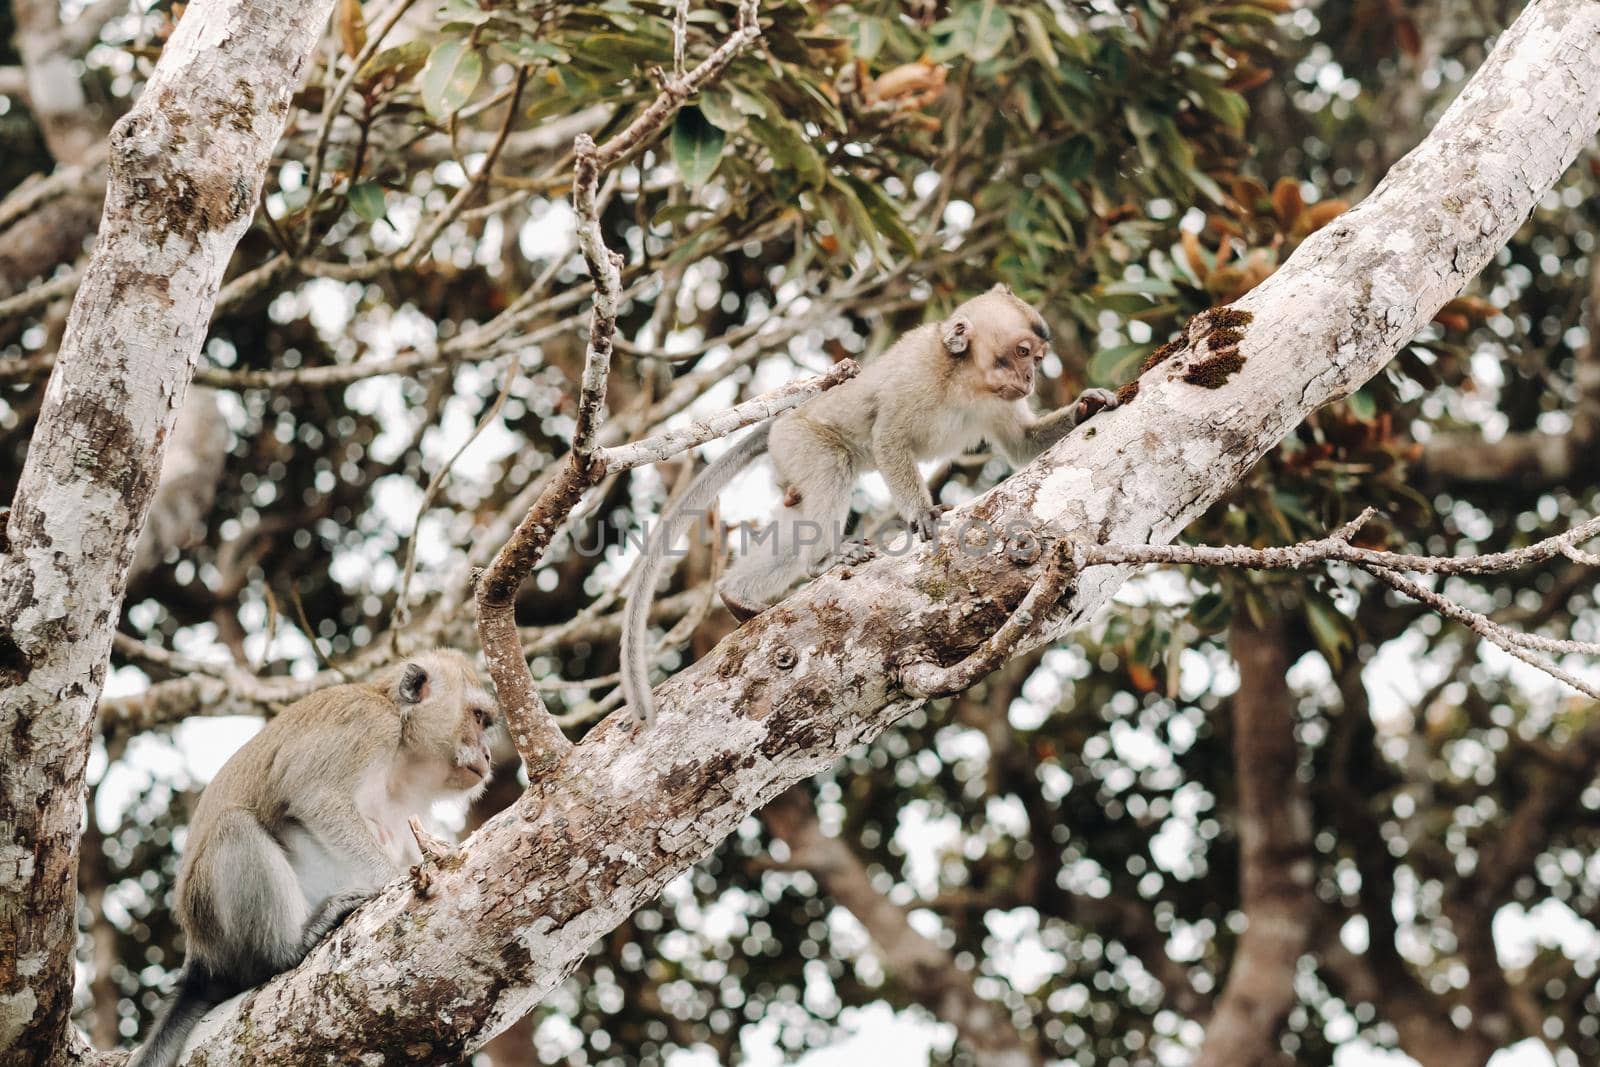 A wild live monkey sits on a tree on the island of Mauritius.Monkeys in the jungle of the island of Mauritius by Lobachad